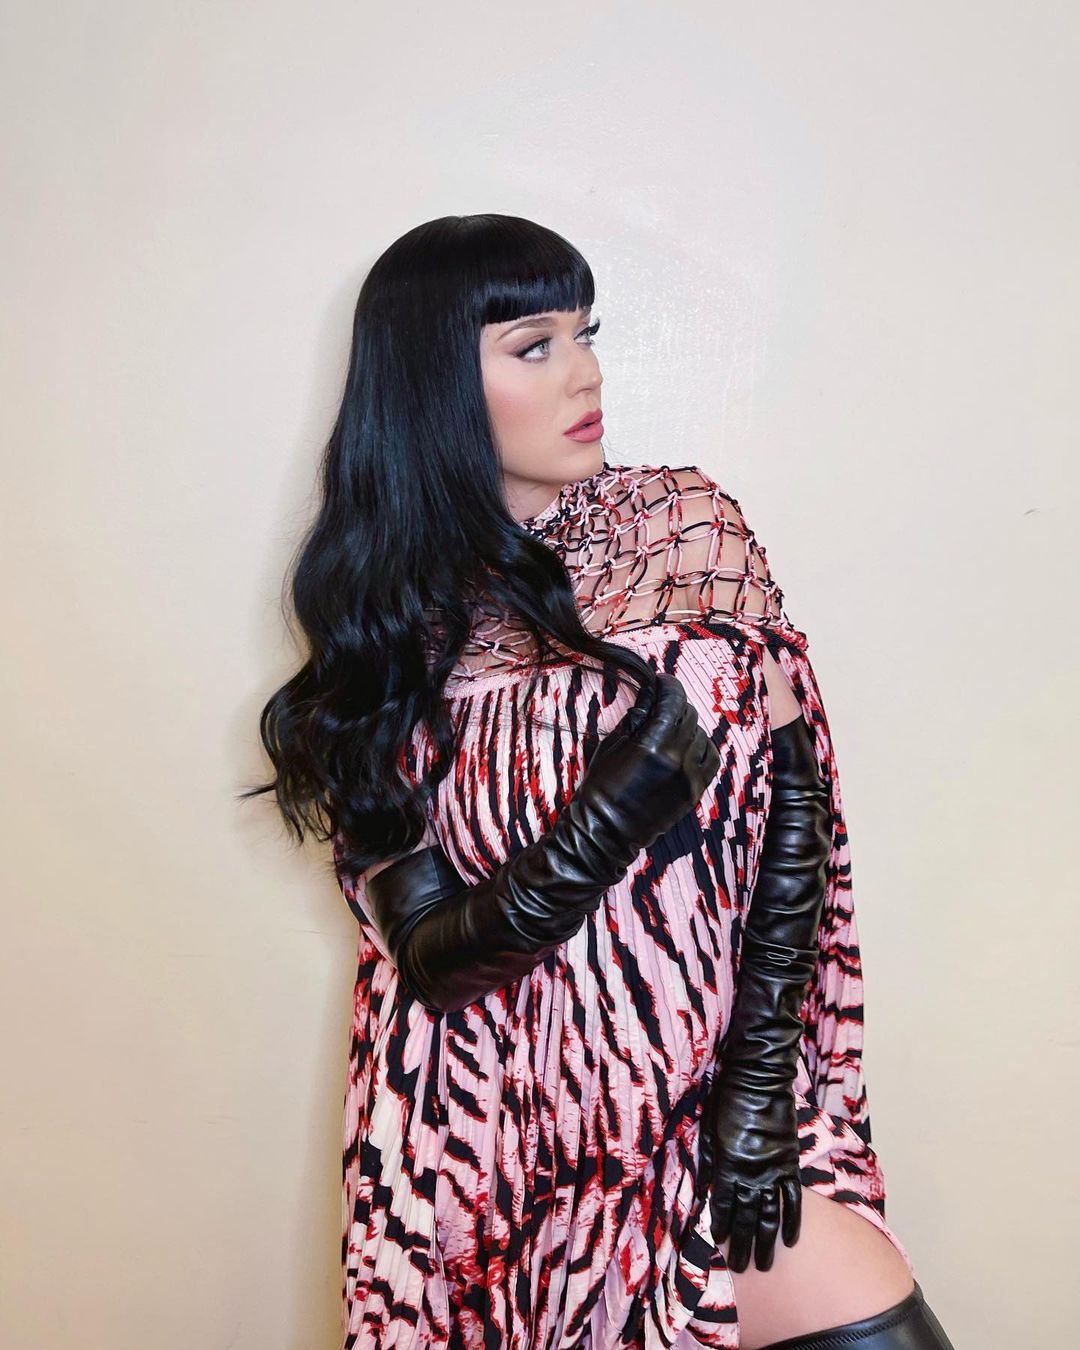 Katy Perry Goes Back To Her Classic Black Hair On 'American Idol'